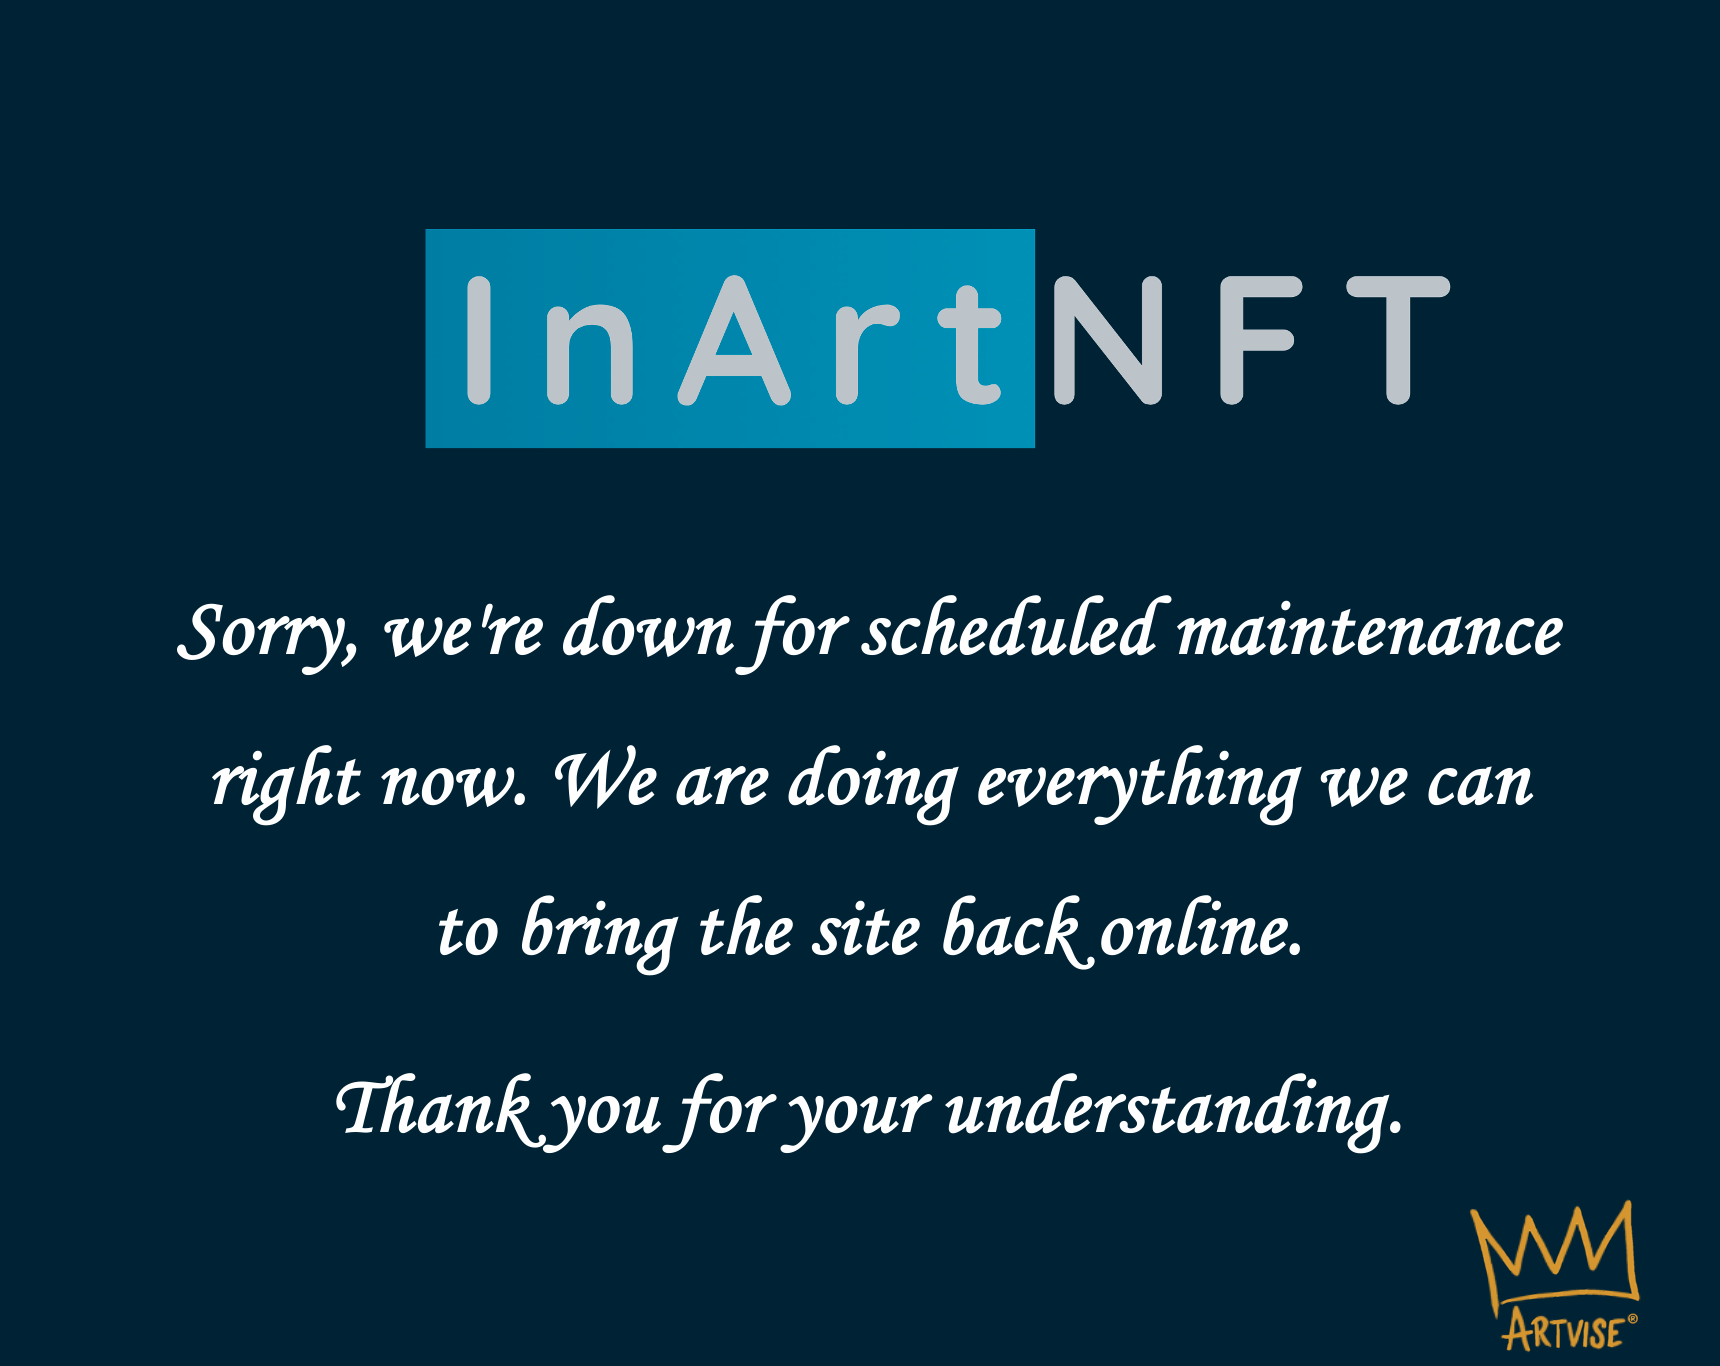 Sorry, we're down for scheduled maintenance right now. We are doing everything we can to bring the site back online. Thank you for your understanding.
